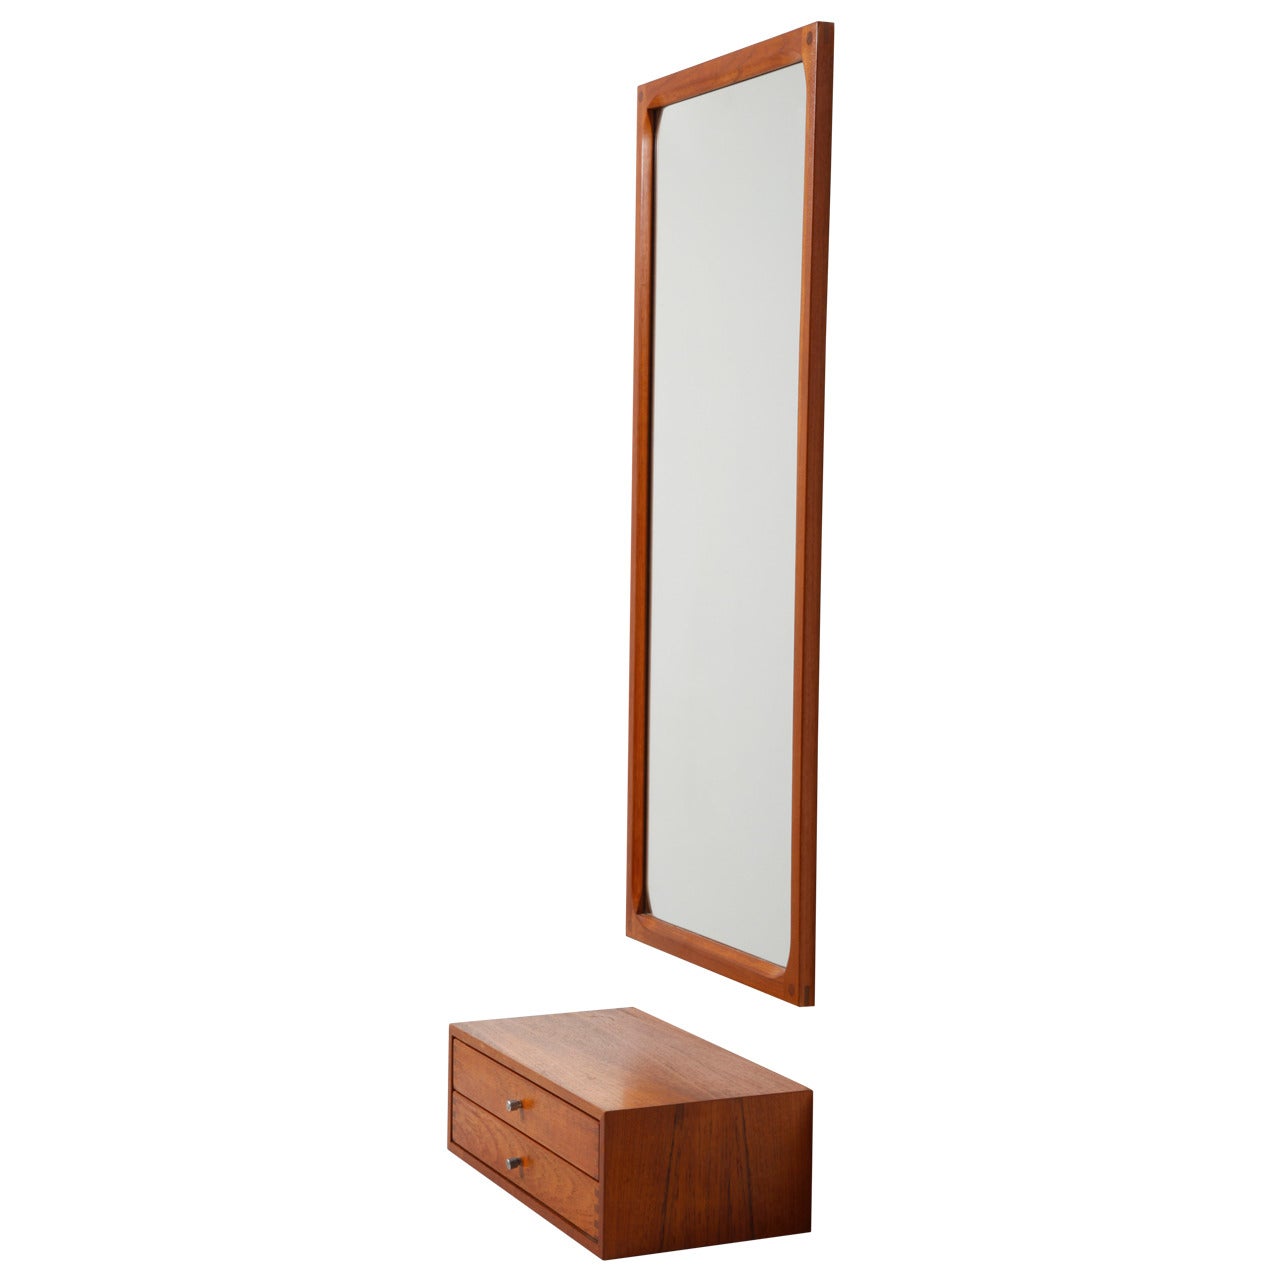 Wall Console and Mirror Designed by Aksel Kjersgaard for Odder, Denmark